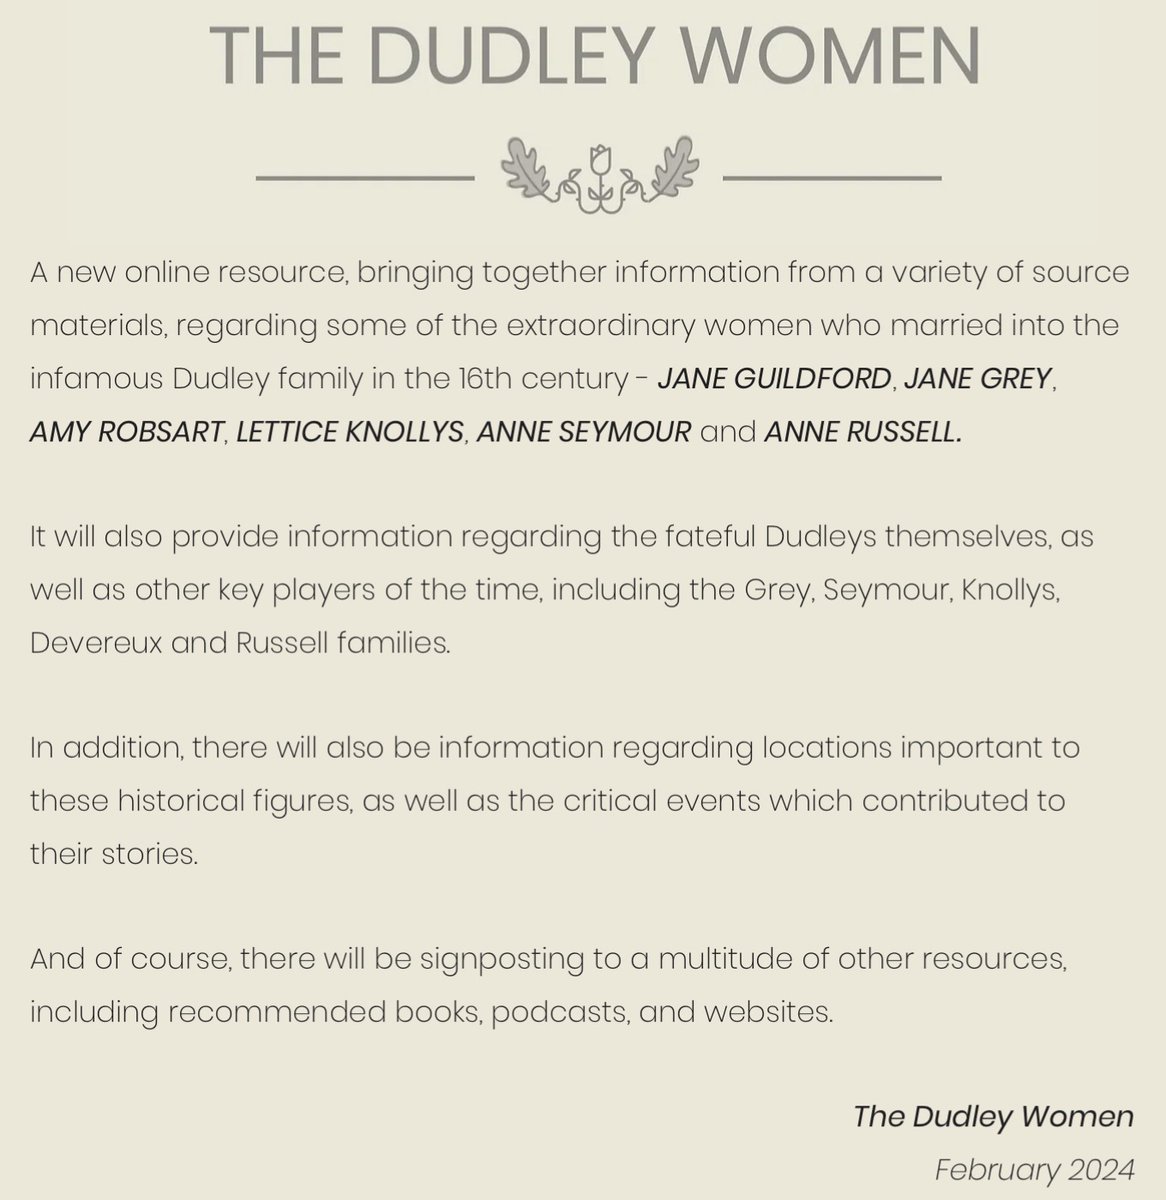 Update on ‘The Dudley Women’ website.

Additional women have been added to the ‘roster’, including ANNE SEYMOUR and ANNE RUSSELL, both Countesses of Warwick.

#thedudleywomen #janeguildford #anneseymour #amyrobsart #ladyjanegrey #letticeknollys #annerussell #tudorhistory #tudors